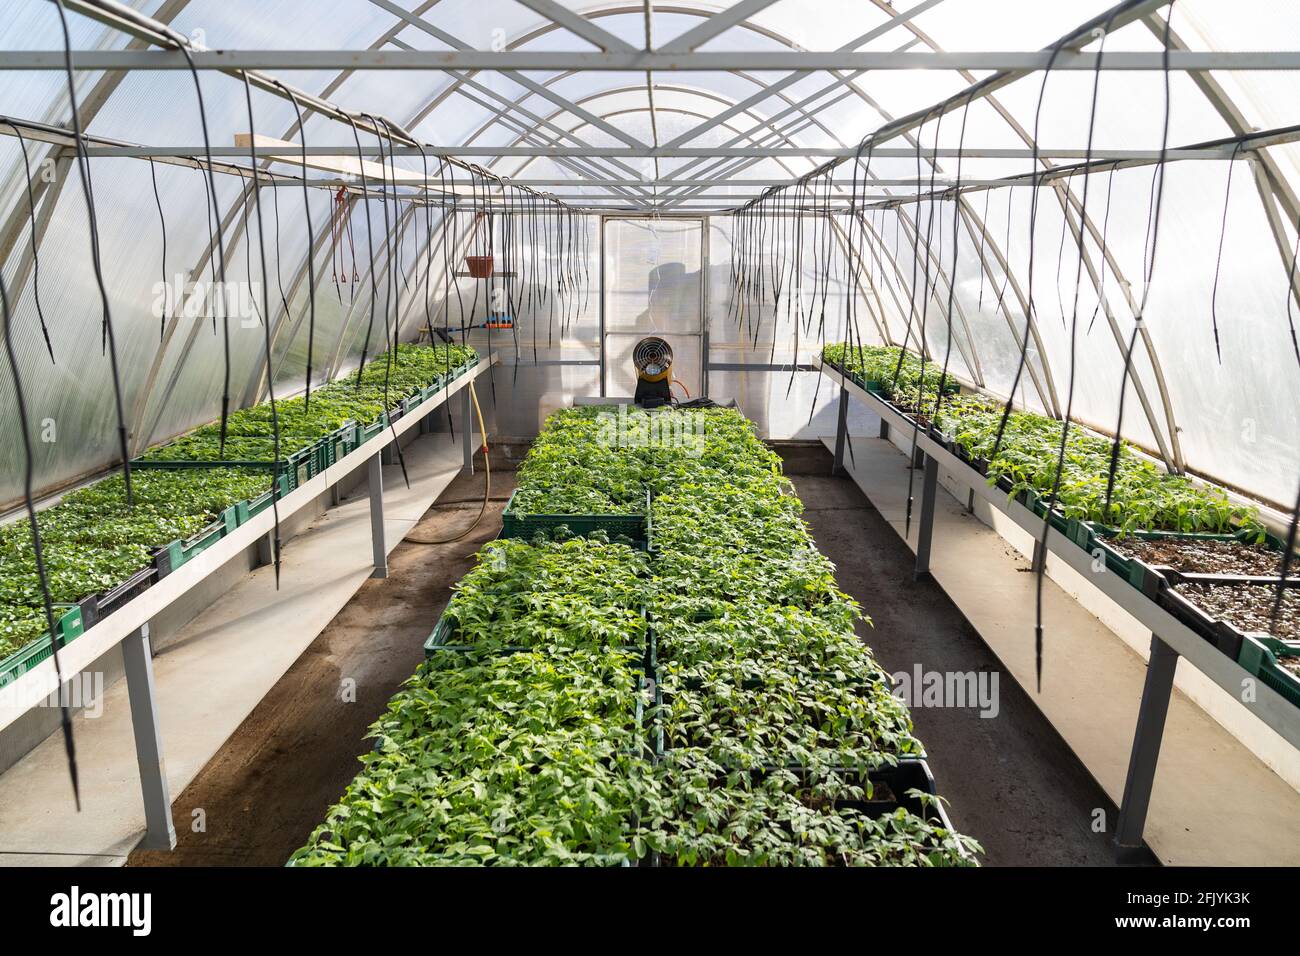 Greenhouse business: vegetables seedling in plant nursery. Tomatoes growing  in glasshouse for market Stock Photo - Alamy